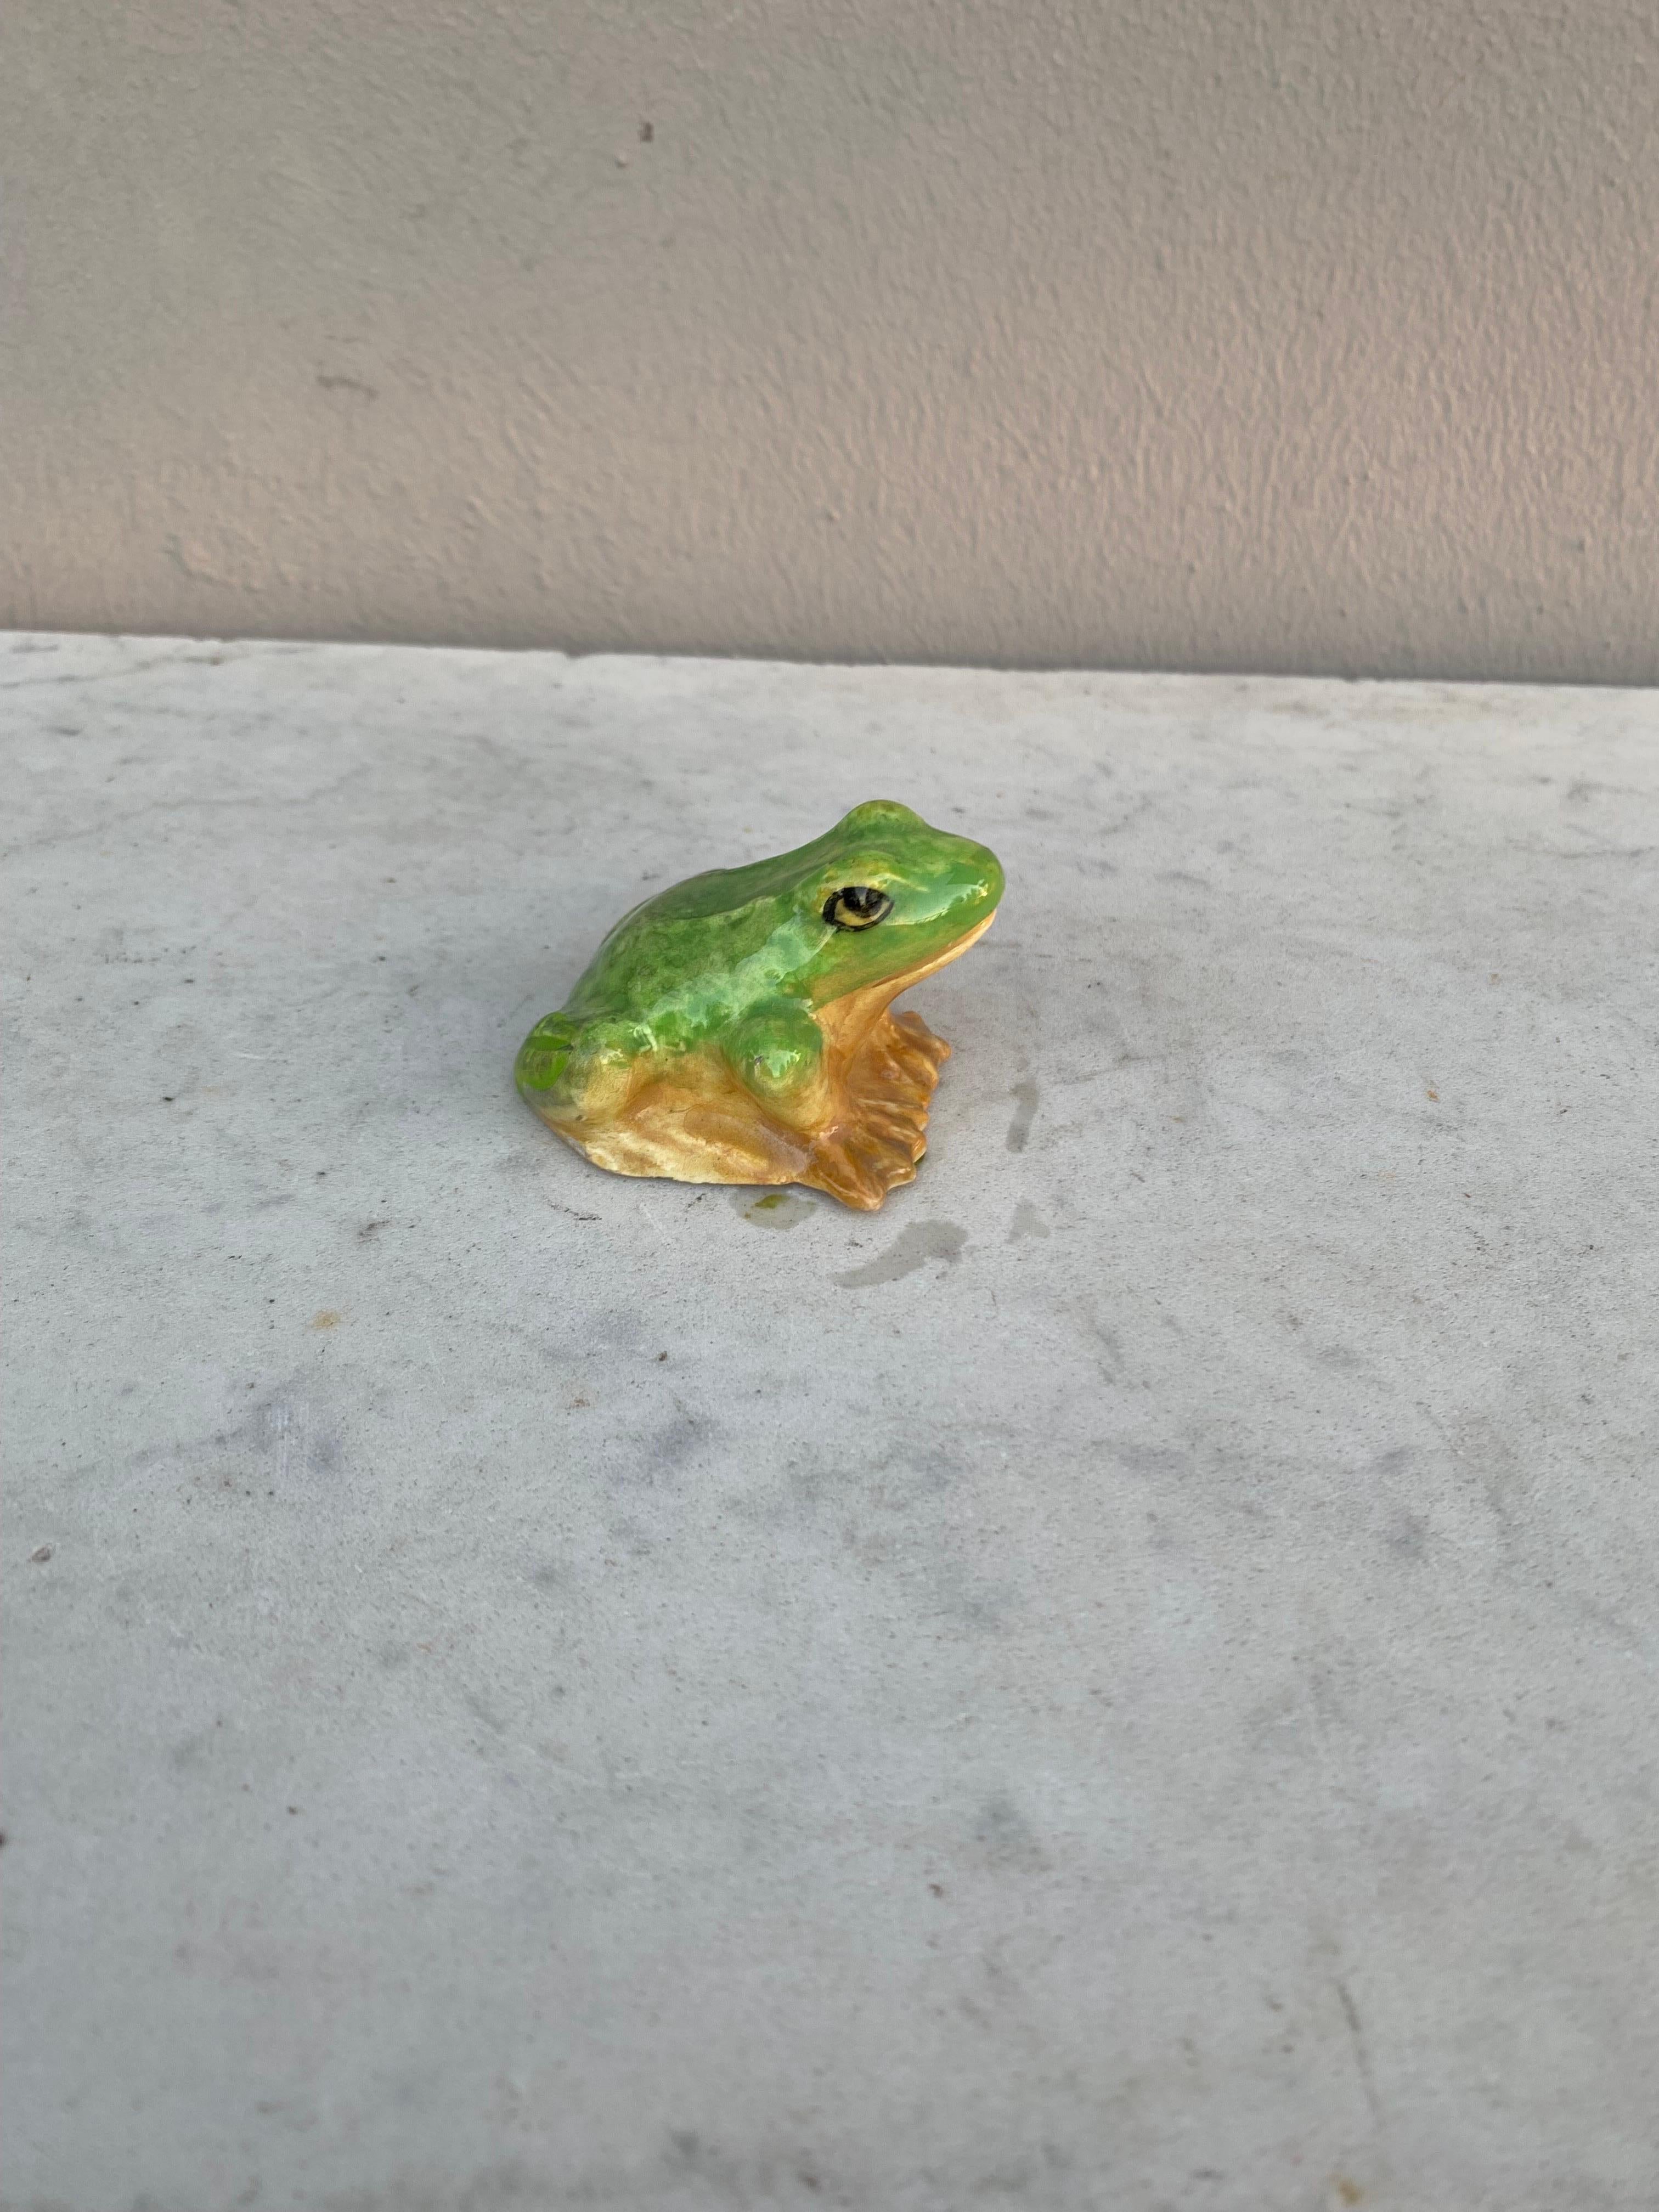 jerome the frog